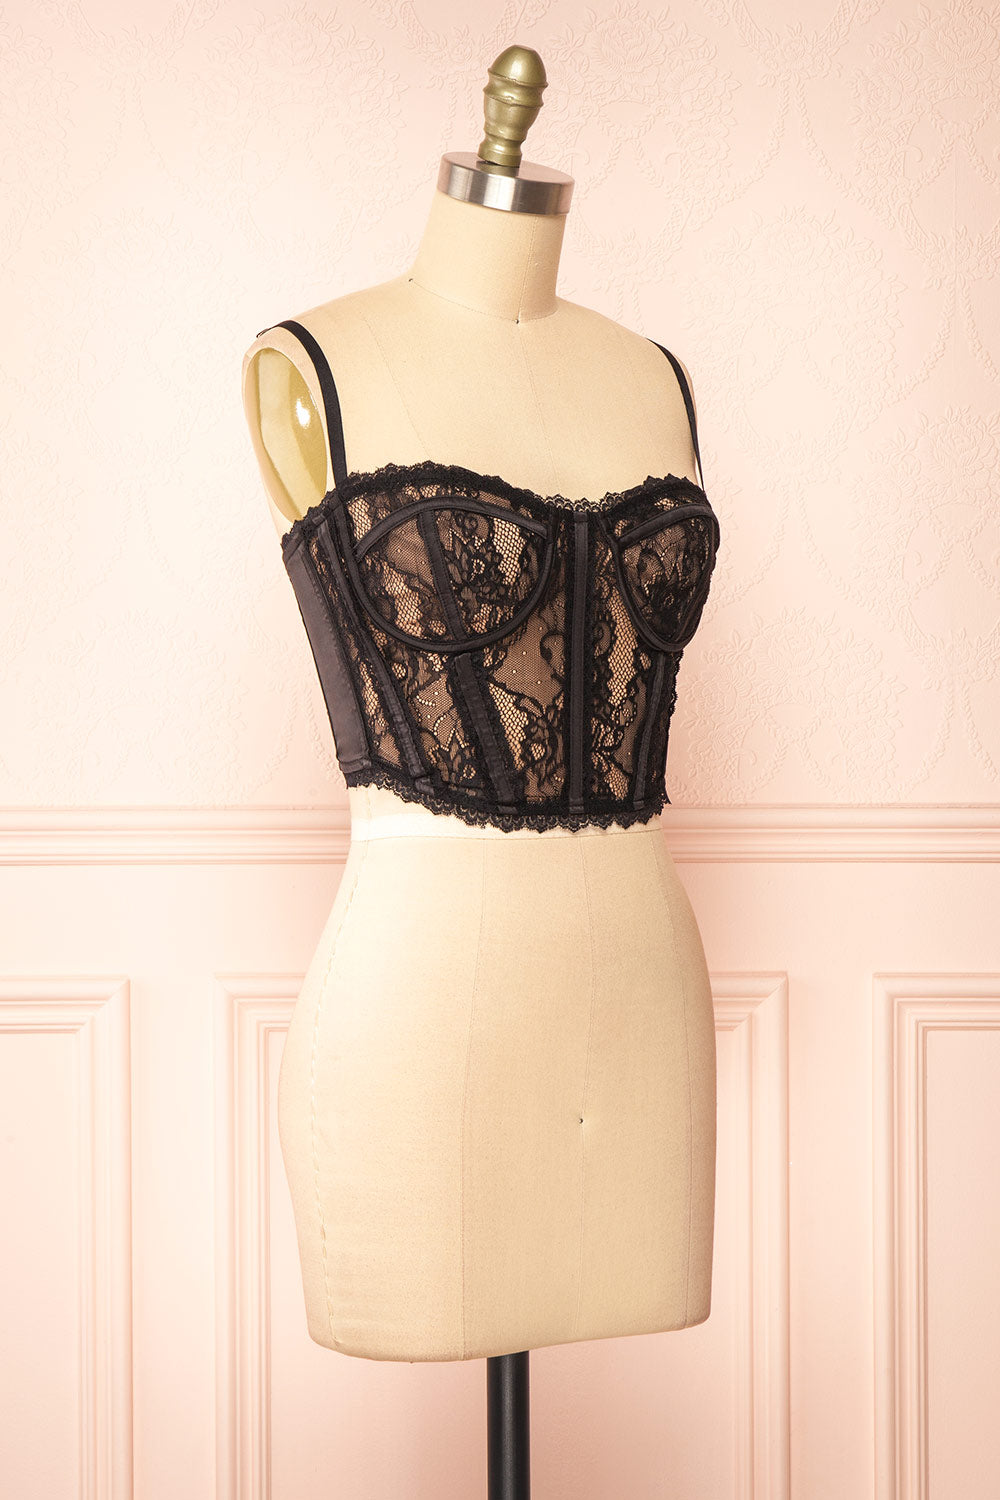 Black Sheer Lace Top - Lace Bustier Top - Cropped Bustier Top - Lulus